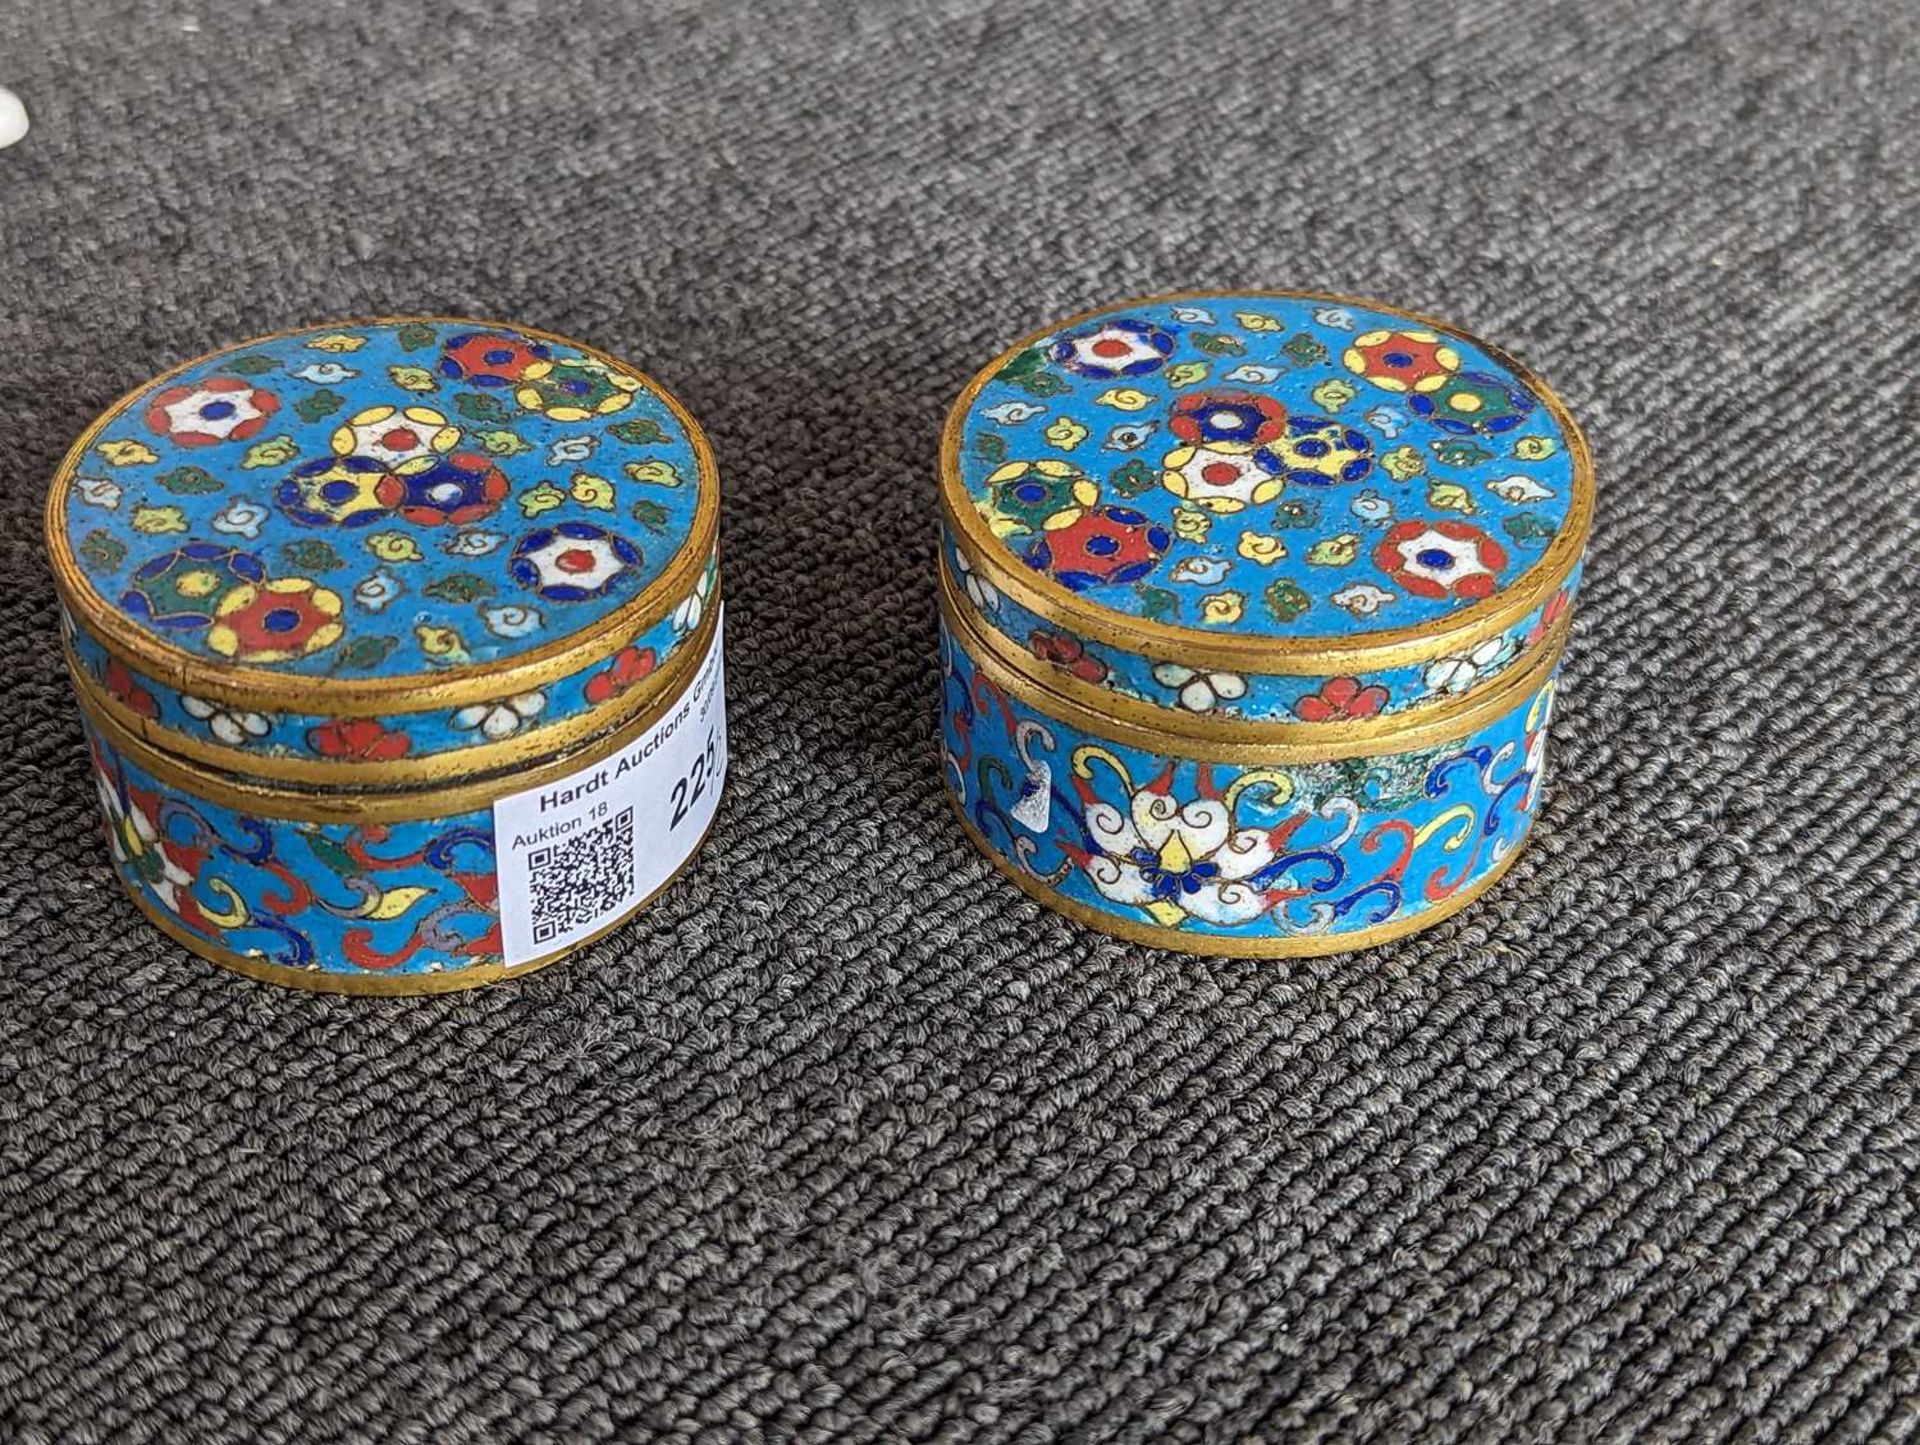 SET OF CLOISONNE BOXES - Image 10 of 15